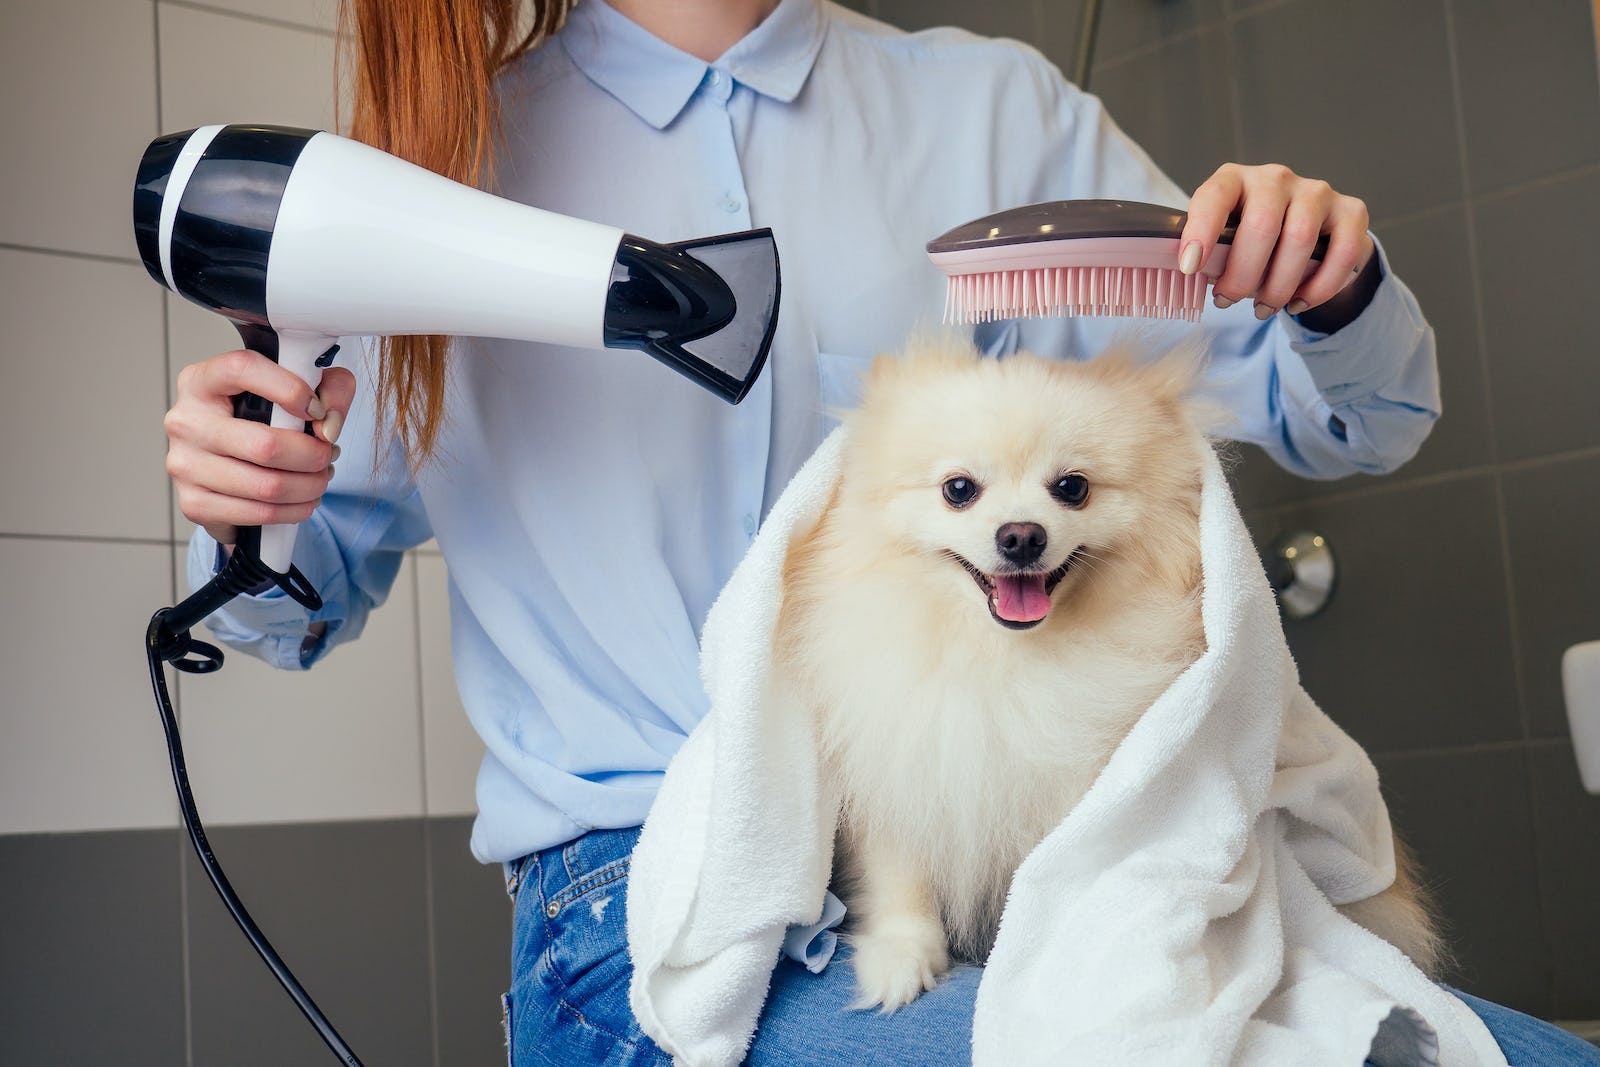 How To Dry A Dog Without A Hair Dryer